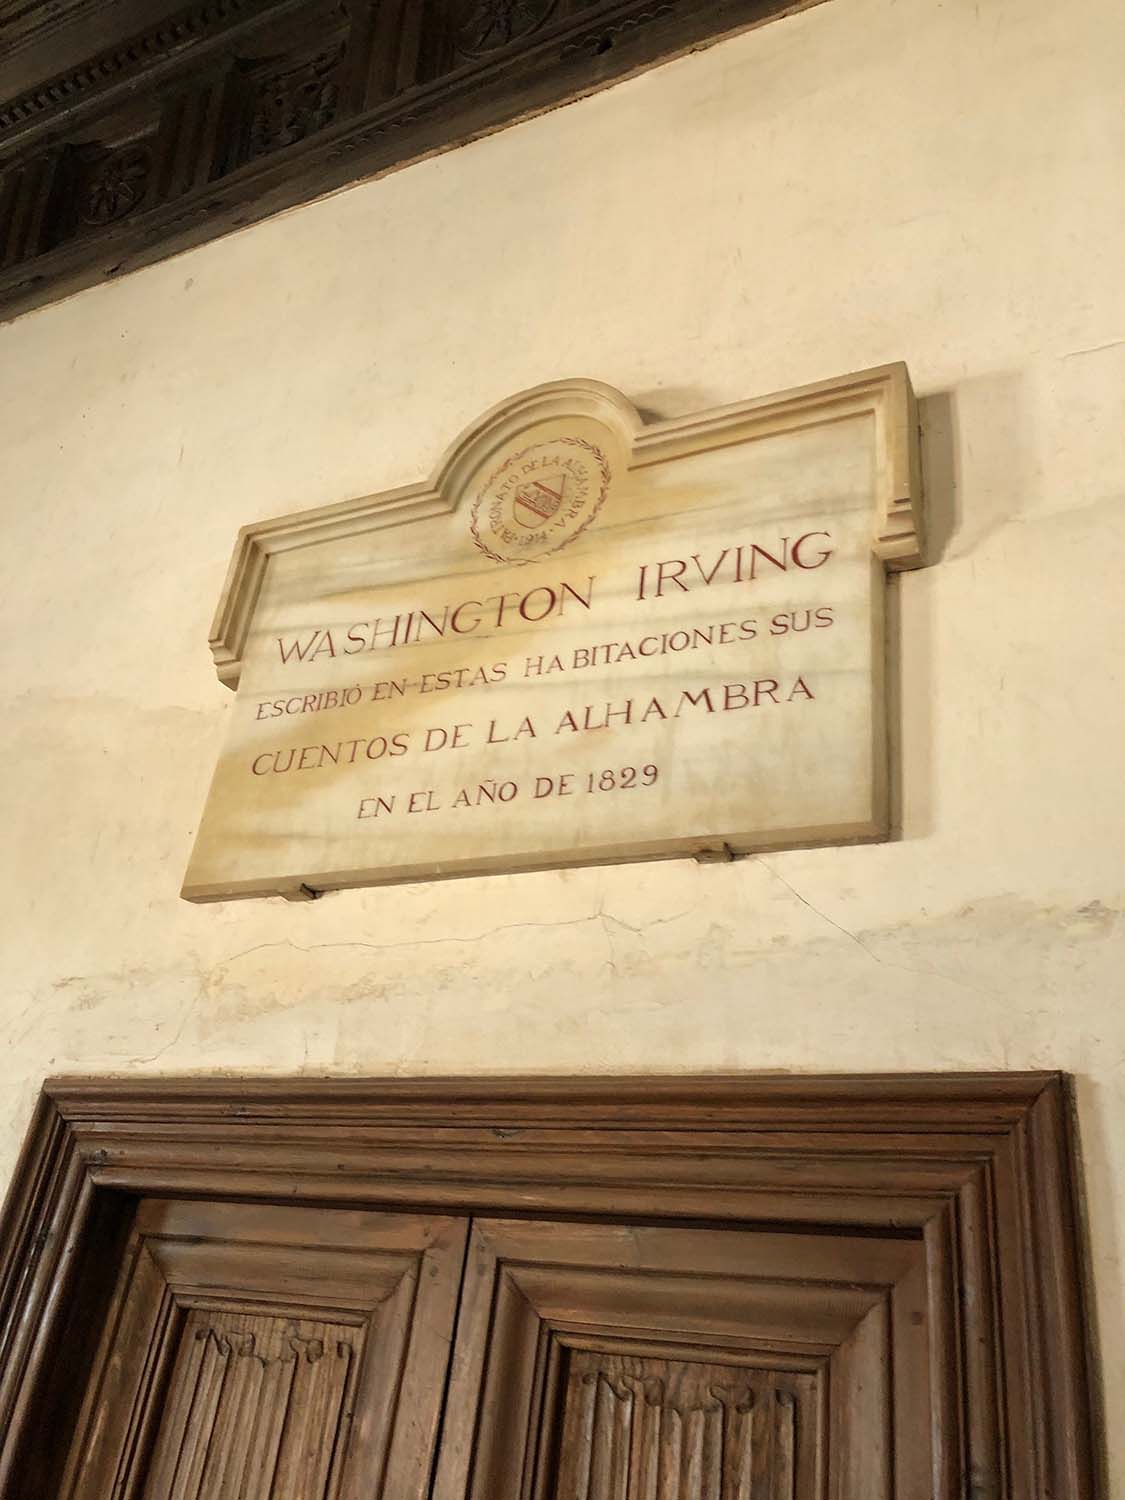 Plaque commemorating Washington Irving's stay at the Alhambra in 1829, Emperor's Chambers